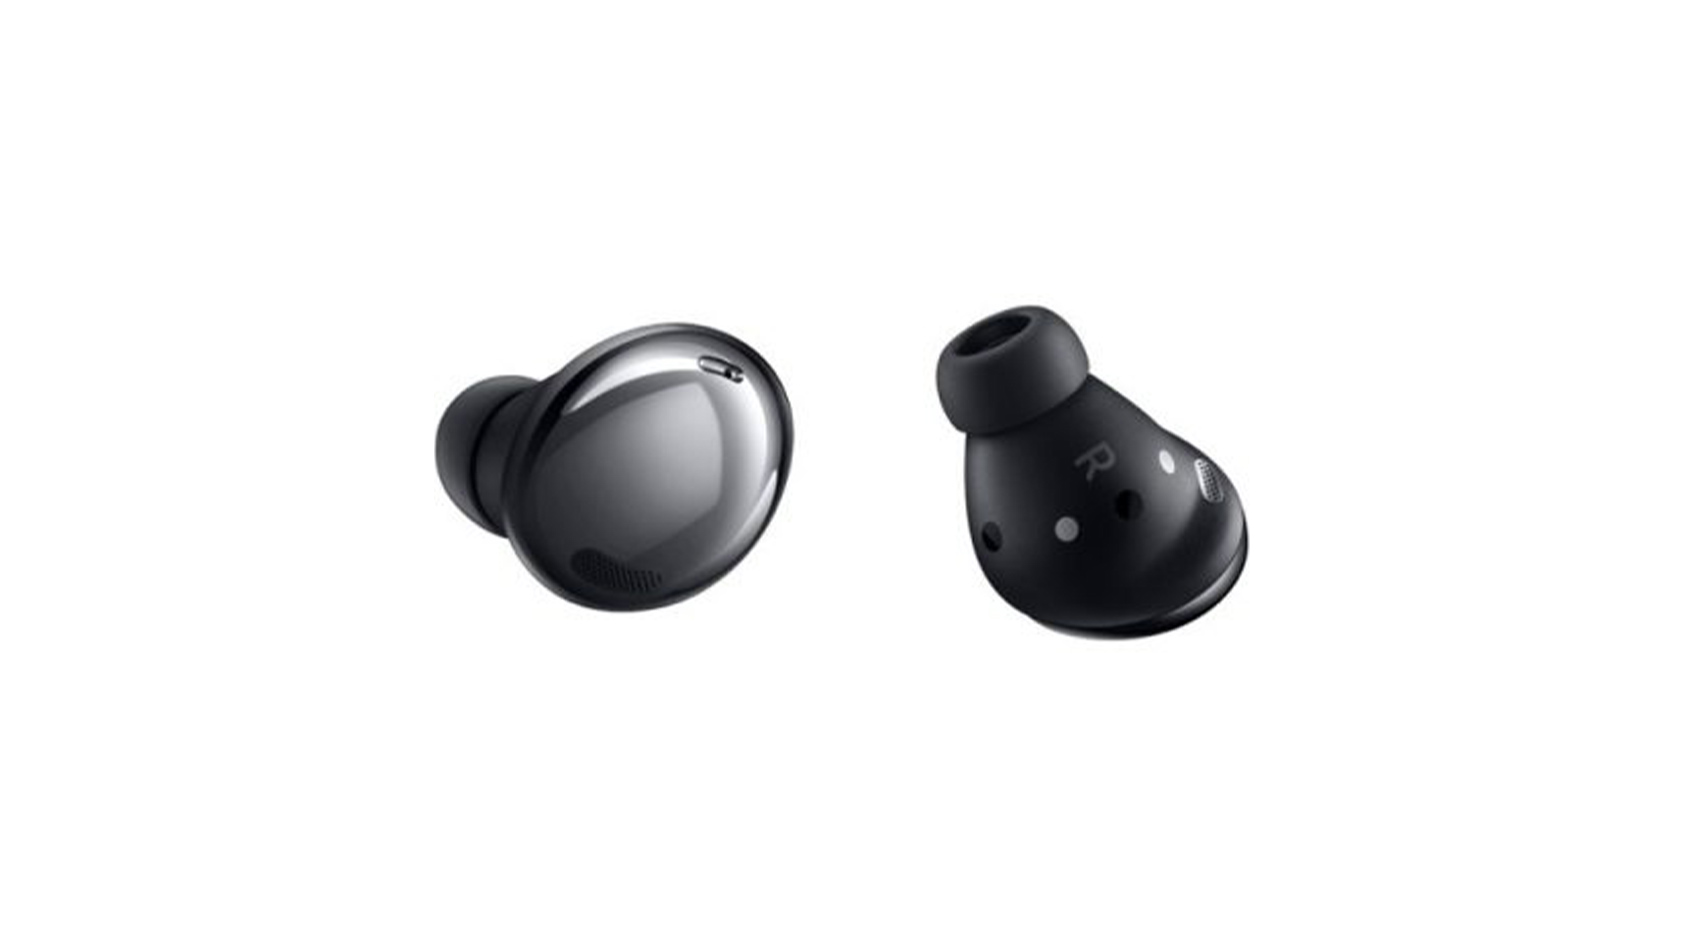 The Samsung Galaxy Buds Pro in black against a white background.